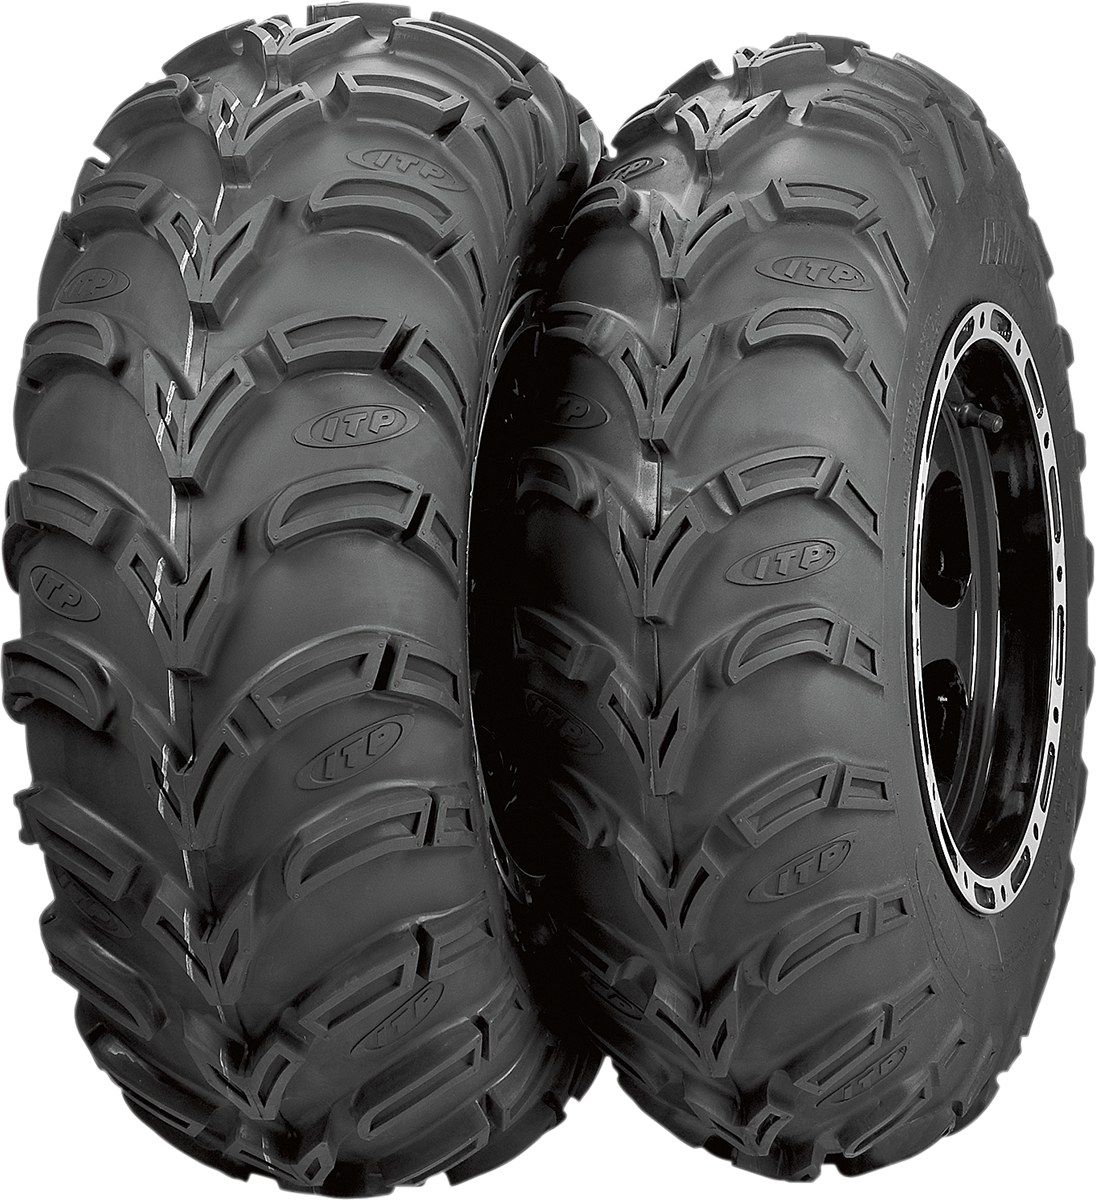 ITP Tire - Mud Lite AT - Front/Rear - 24x8-12 - 6 Ply 560430